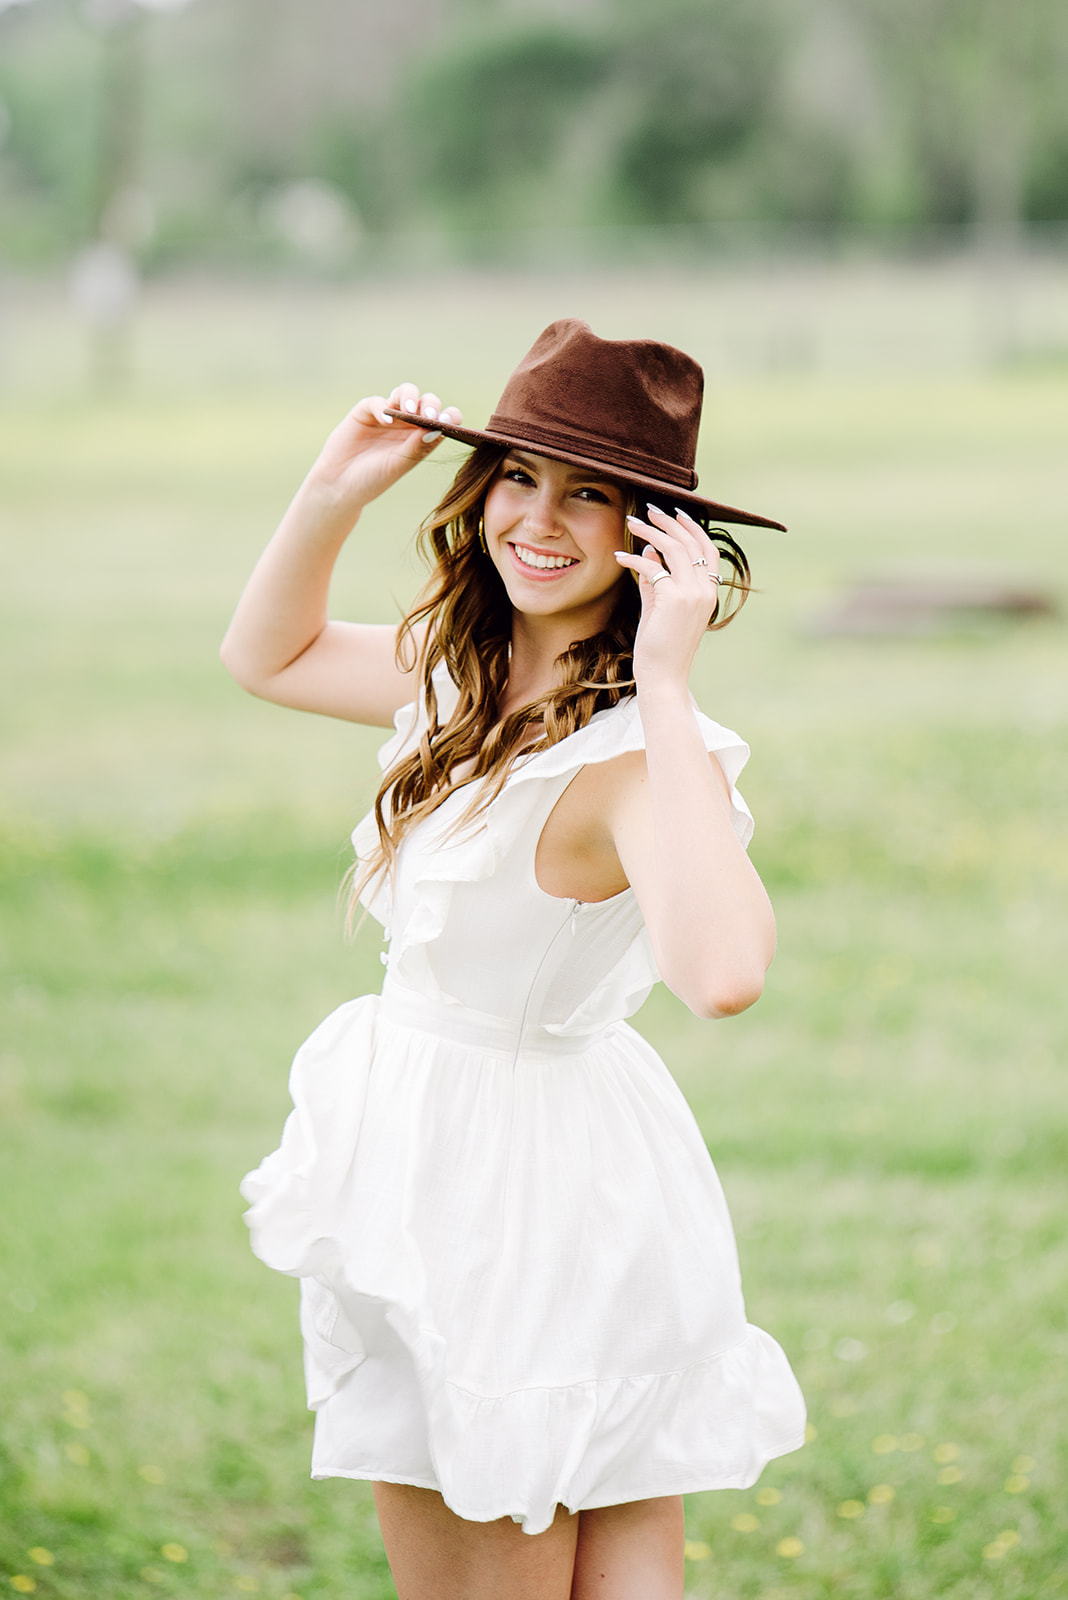 what to wear for your senior photography session, high school girl in white dress, brown boots, and cowboy hat standing in field